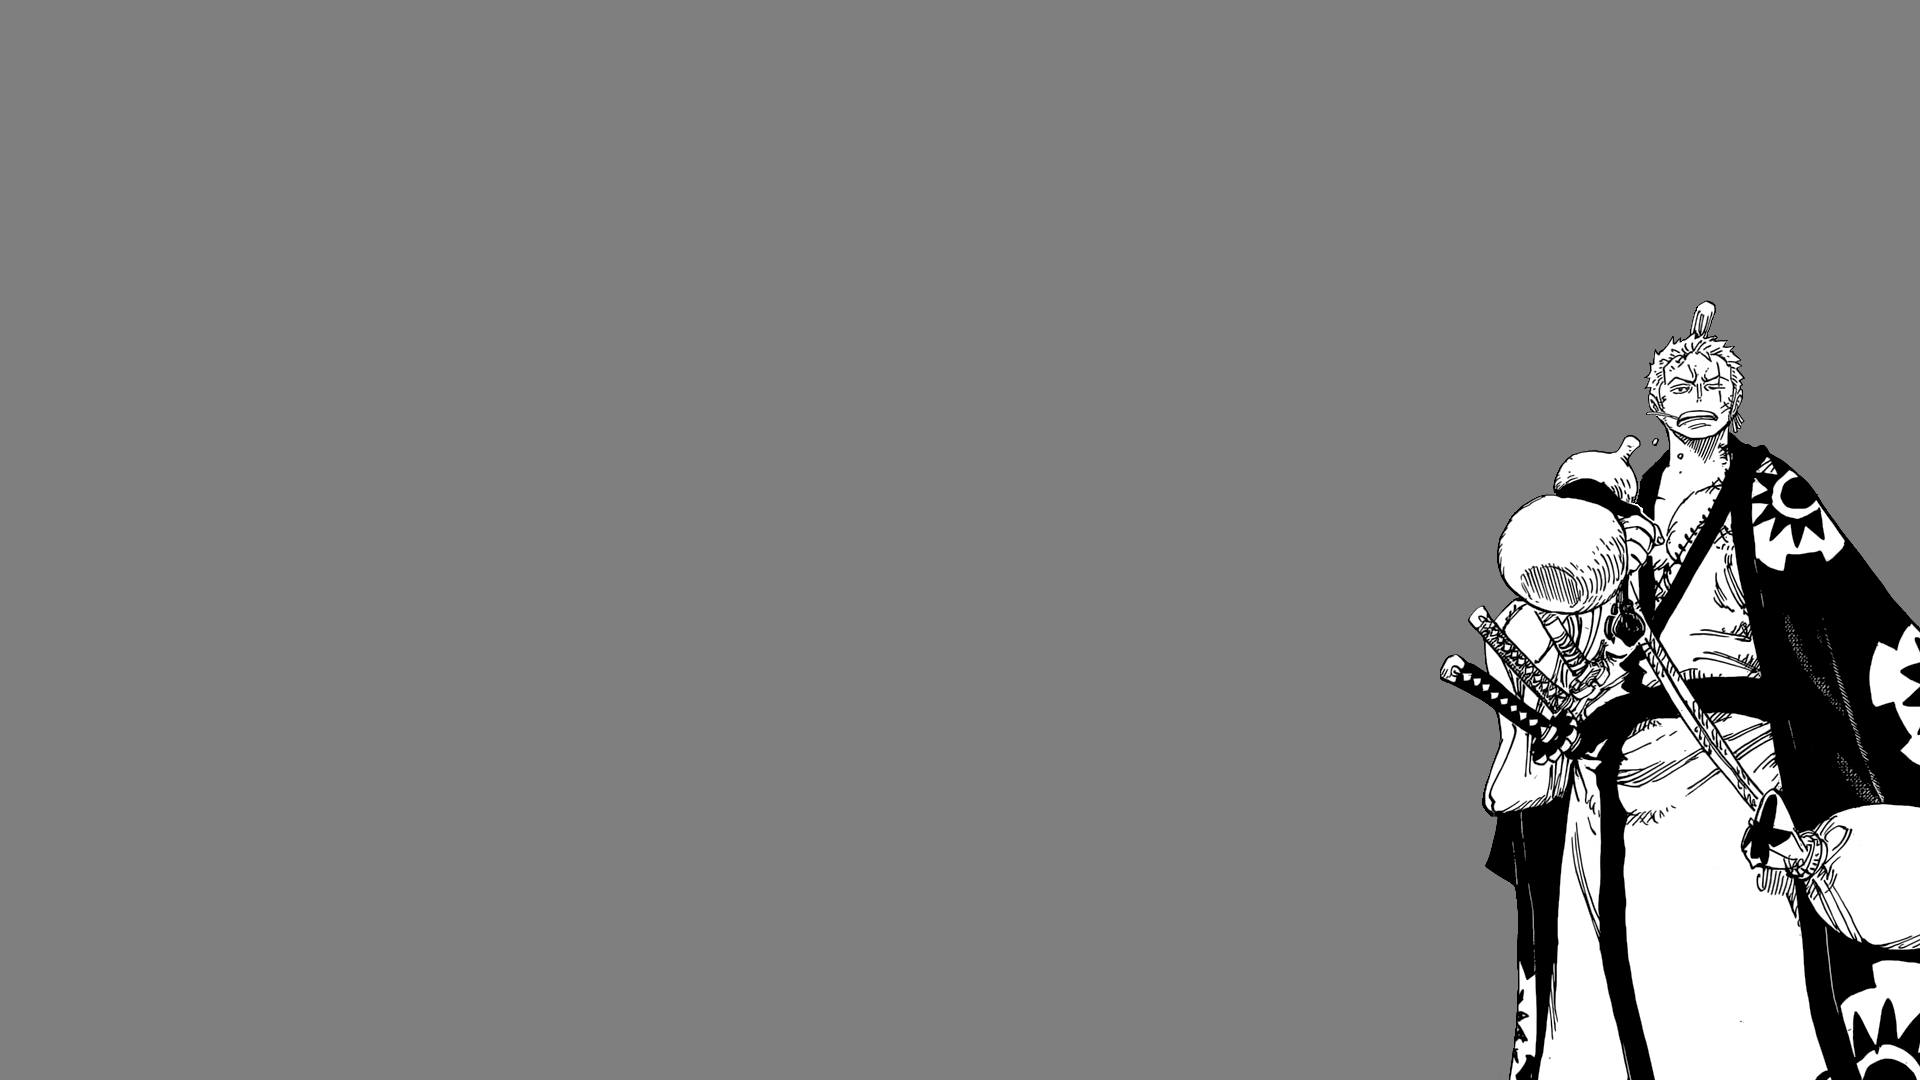 Zoro Manga Panel wallpapers made in MS Paint : OnePiece.